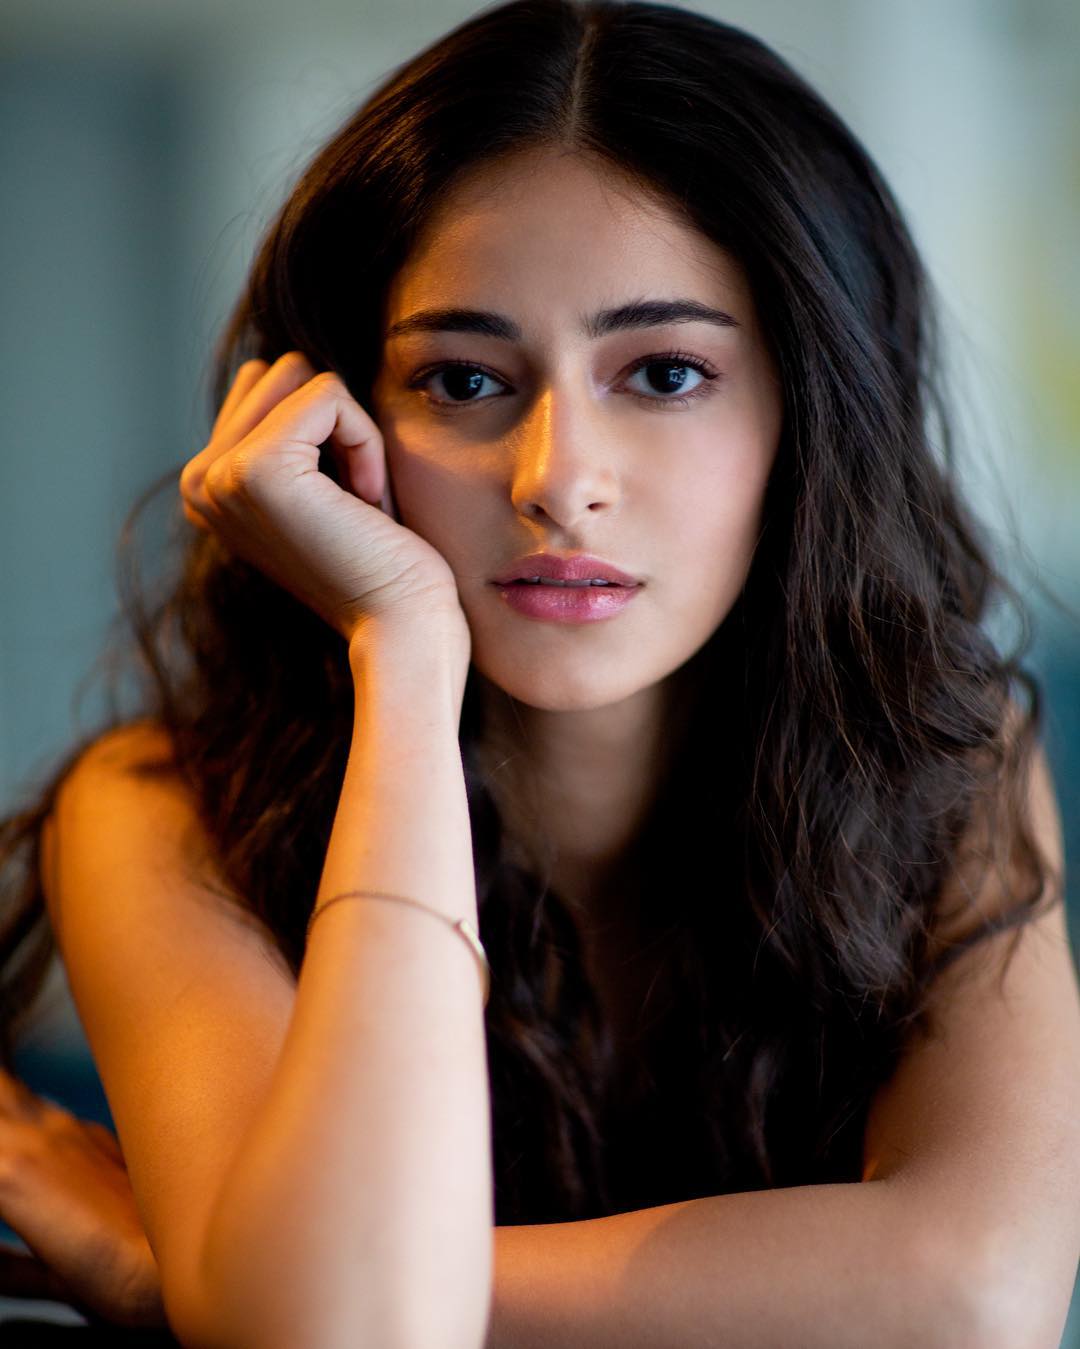 Ananya pandey is the hottest Indian women 